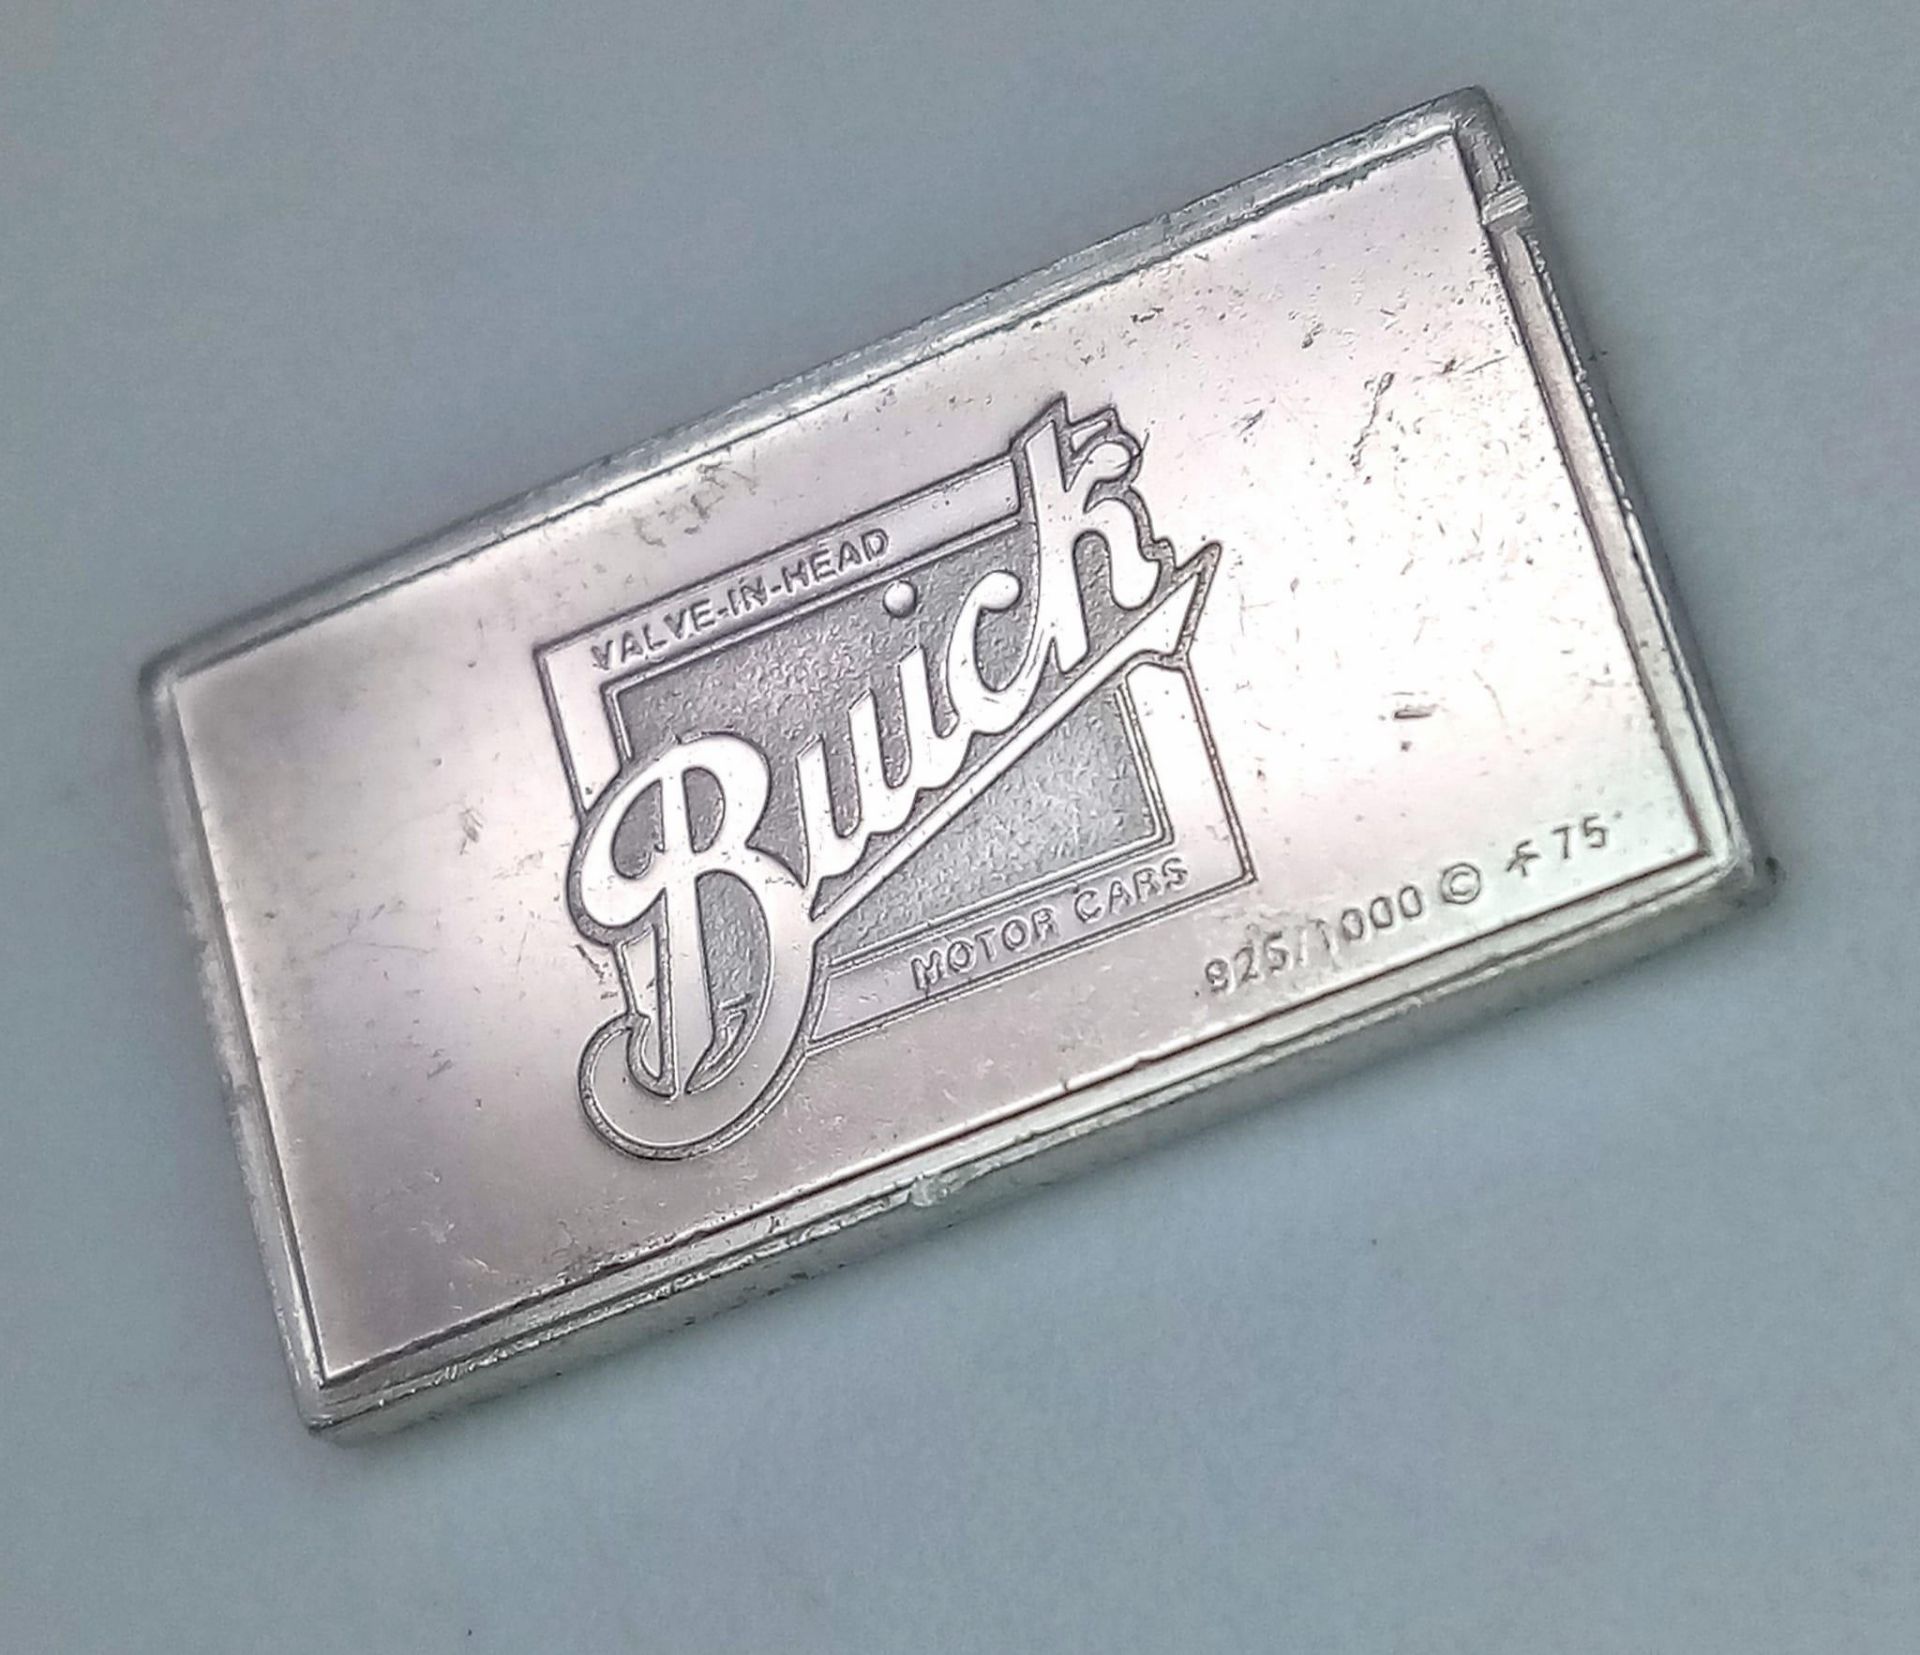 2 X STERLING SILVER AND ENAMEL BUICK CAR LOGO MANUFACTURER PLAQUES, MADE IN UNITED STATES USA, - Image 4 of 6